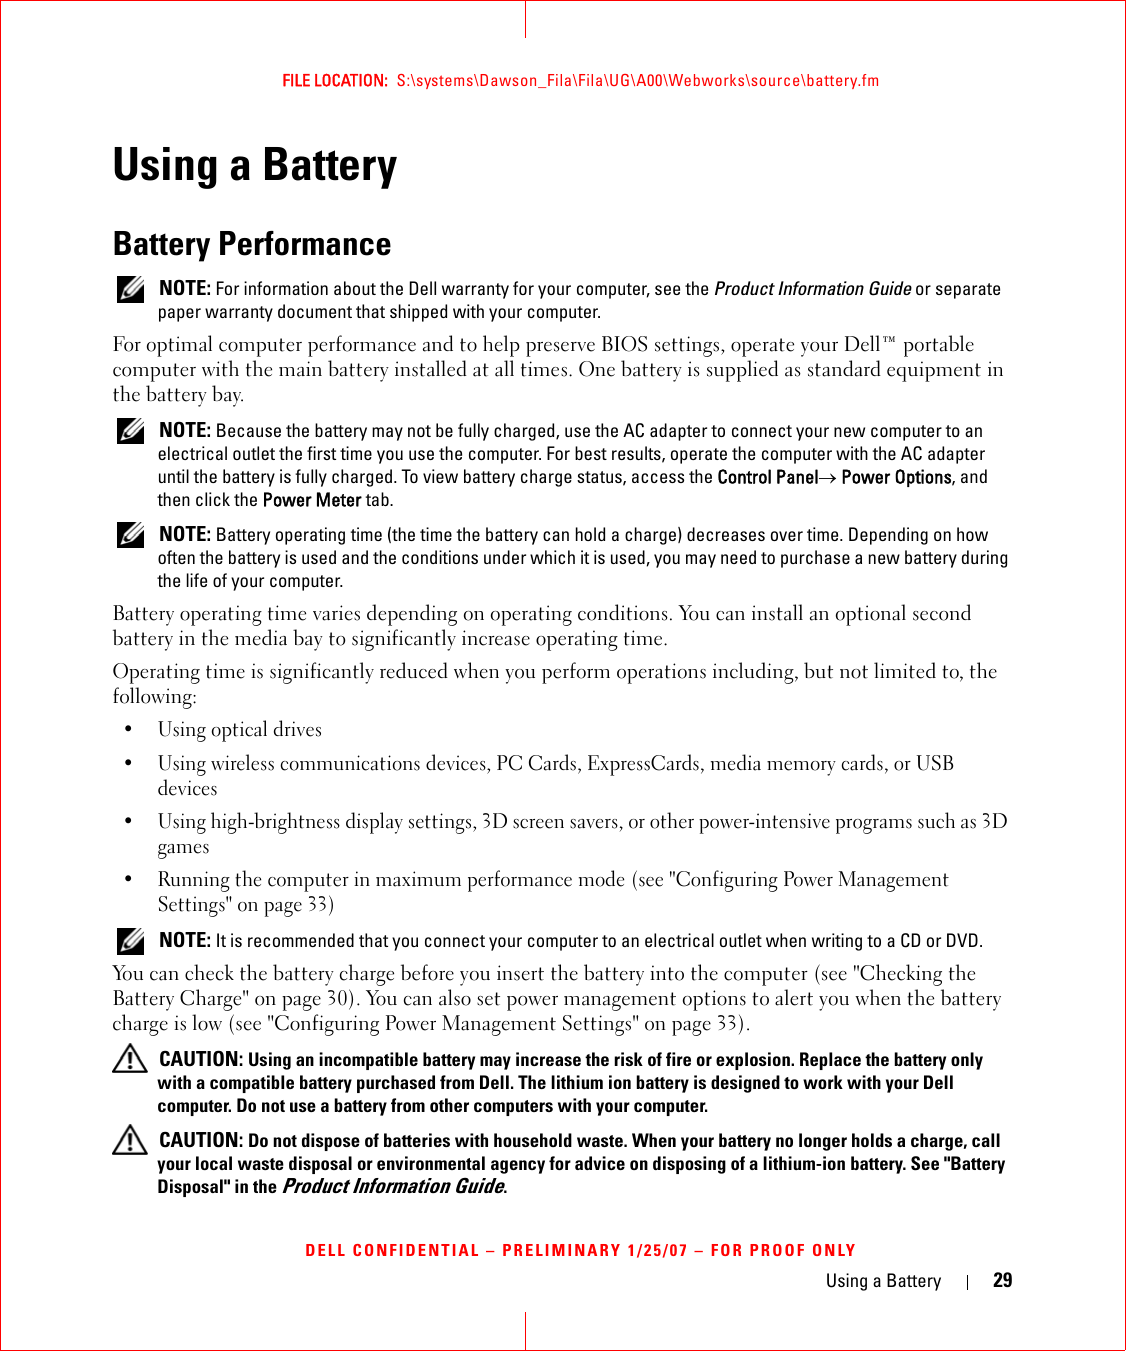 Using a Battery 29FILE LOCATION:  S:\systems\Dawson_Fila\Fila\UG\A00\Webworks\source\battery.fmDELL CONFIDENTIAL – PRELIMINARY 1/25/07 – FOR PROOF ONLYUsing a BatteryBattery Performance NOTE: For information about the Dell warranty for your computer, see the Product Information Guide or separate paper warranty document that shipped with your computer.For optimal computer performance and to help preserve BIOS settings, operate your Dell™ portable computer with the main battery installed at all times. One battery is supplied as standard equipment in the battery bay. NOTE: Because the battery may not be fully charged, use the AC adapter to connect your new computer to an electrical outlet the first time you use the computer. For best results, operate the computer with the AC adapter until the battery is fully charged. To view battery charge status, access the Control Panel→ Power Options, and then click the Power Meter tab. NOTE: Battery operating time (the time the battery can hold a charge) decreases over time. Depending on how often the battery is used and the conditions under which it is used, you may need to purchase a new battery during the life of your computer.Battery operating time varies depending on operating conditions. You can install an optional second battery in the media bay to significantly increase operating time.Operating time is significantly reduced when you perform operations including, but not limited to, the following:•Using optical drives• Using wireless communications devices, PC Cards, ExpressCards, media memory cards, or USB devices• Using high-brightness display settings, 3D screen savers, or other power-intensive programs such as 3D games• Running the computer in maximum performance mode (see &quot;Configuring Power Management Settings&quot; on page 33) NOTE: It is recommended that you connect your computer to an electrical outlet when writing to a CD or DVD.You can check the battery charge before you insert the battery into the computer (see &quot;Checking the Battery Charge&quot; on page 30). You can also set power management options to alert you when the battery charge is low (see &quot;Configuring Power Management Settings&quot; on page 33). CAUTION: Using an incompatible battery may increase the risk of fire or explosion. Replace the battery only with a compatible battery purchased from Dell. The lithium ion battery is designed to work with your Dell computer. Do not use a battery from other computers with your computer.  CAUTION: Do not dispose of batteries with household waste. When your battery no longer holds a charge, call your local waste disposal or environmental agency for advice on disposing of a lithium-ion battery. See &quot;Battery Disposal&quot; in the Product Information Guide.